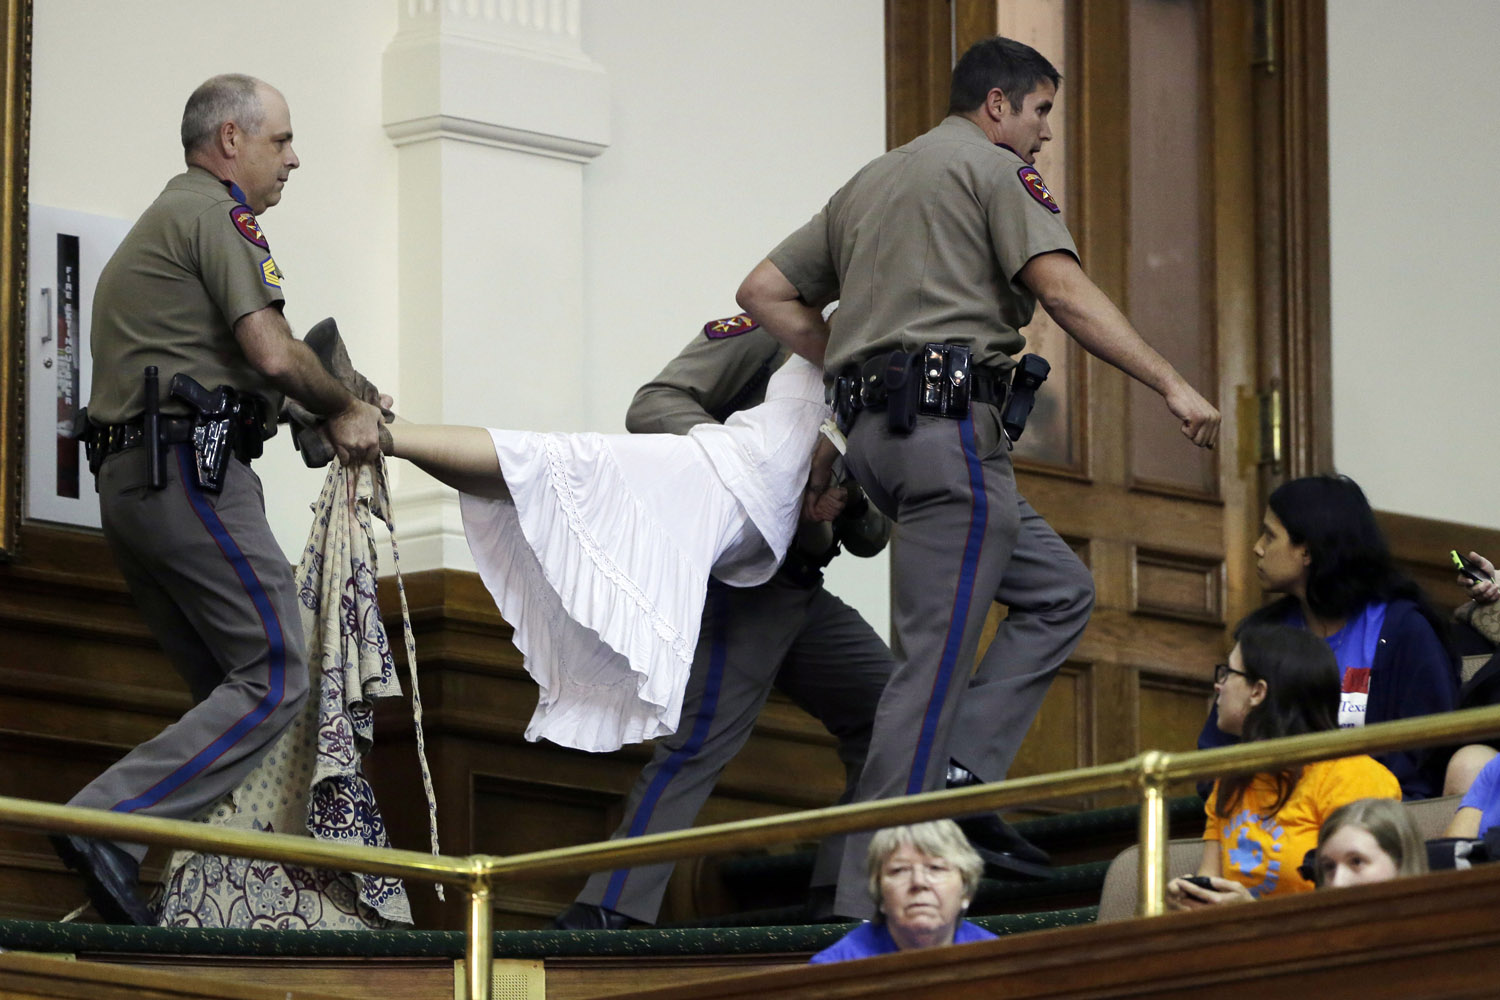 July 12, 2013. A pro-abortion rights protester is removed from the Texas Senate gallery by Texas state troopers as the Senate debates an abortion bill in Austin, Texas.